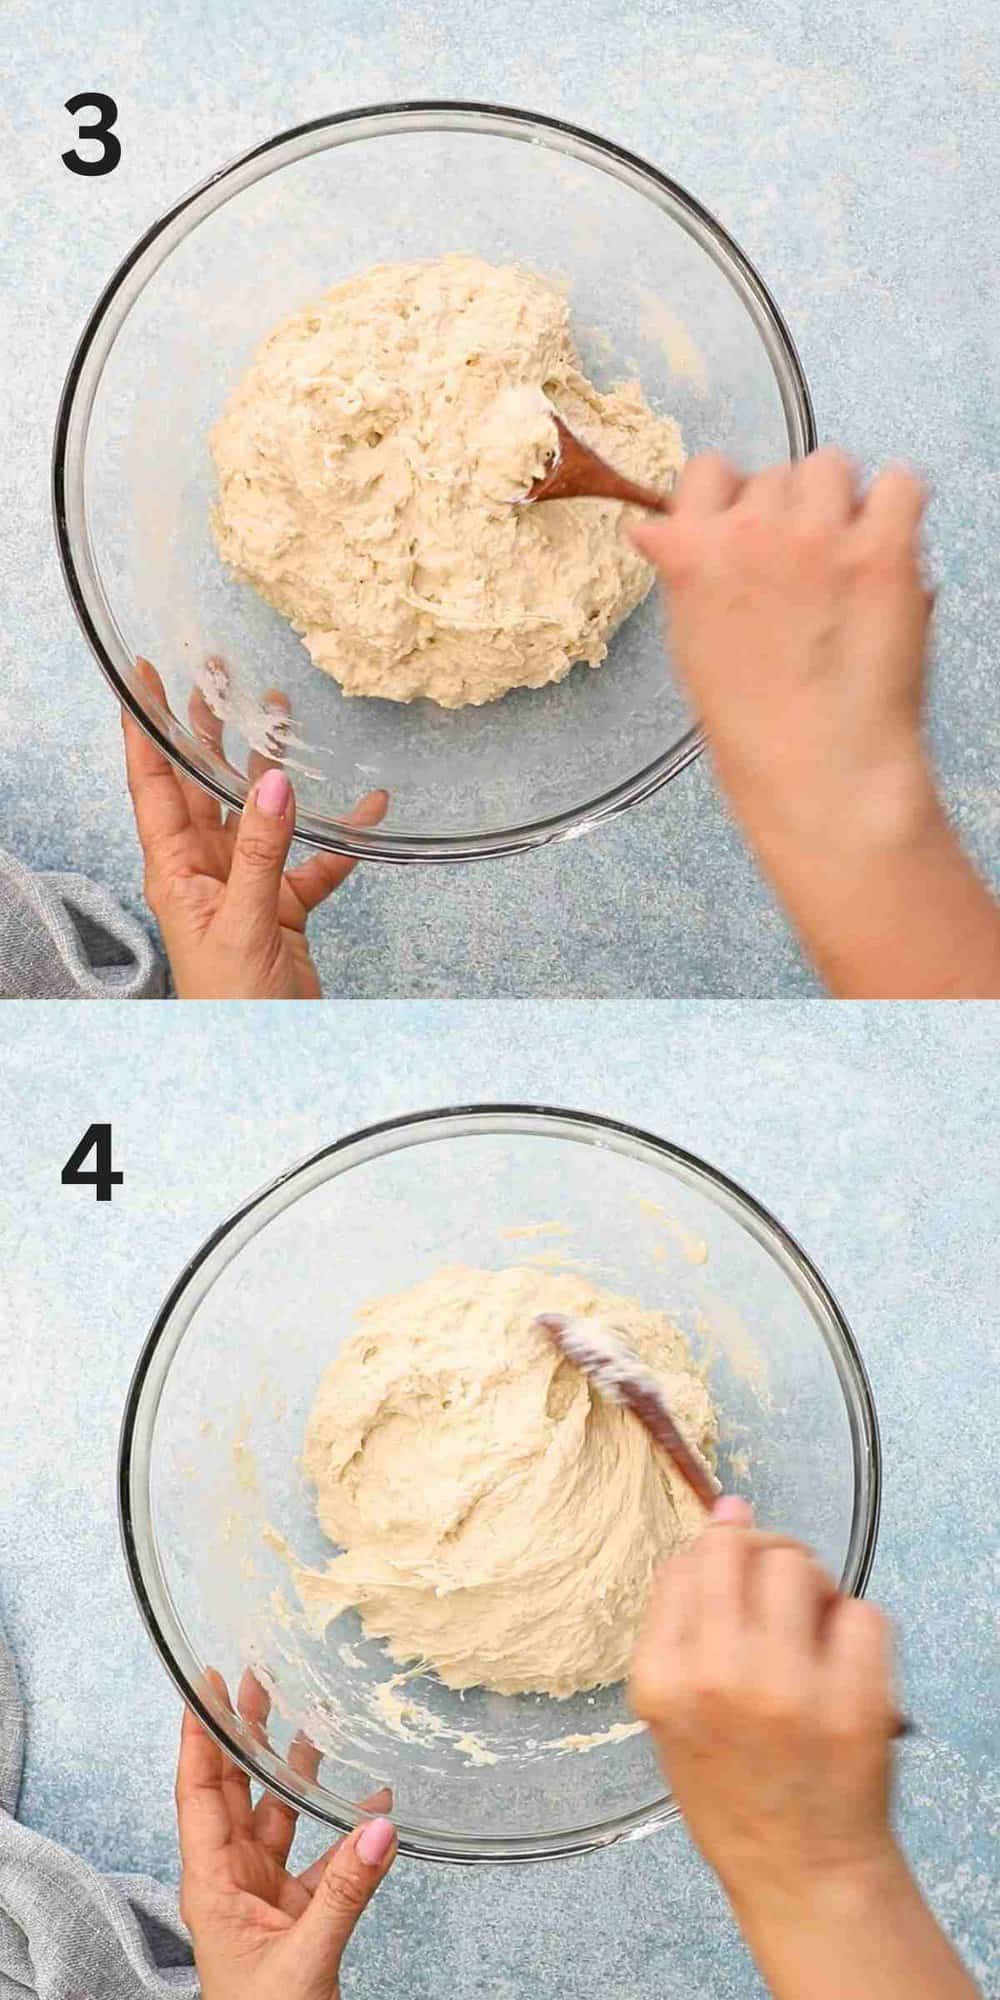 2 photo collage of two hands mixing yeast dough in a glass bowl.